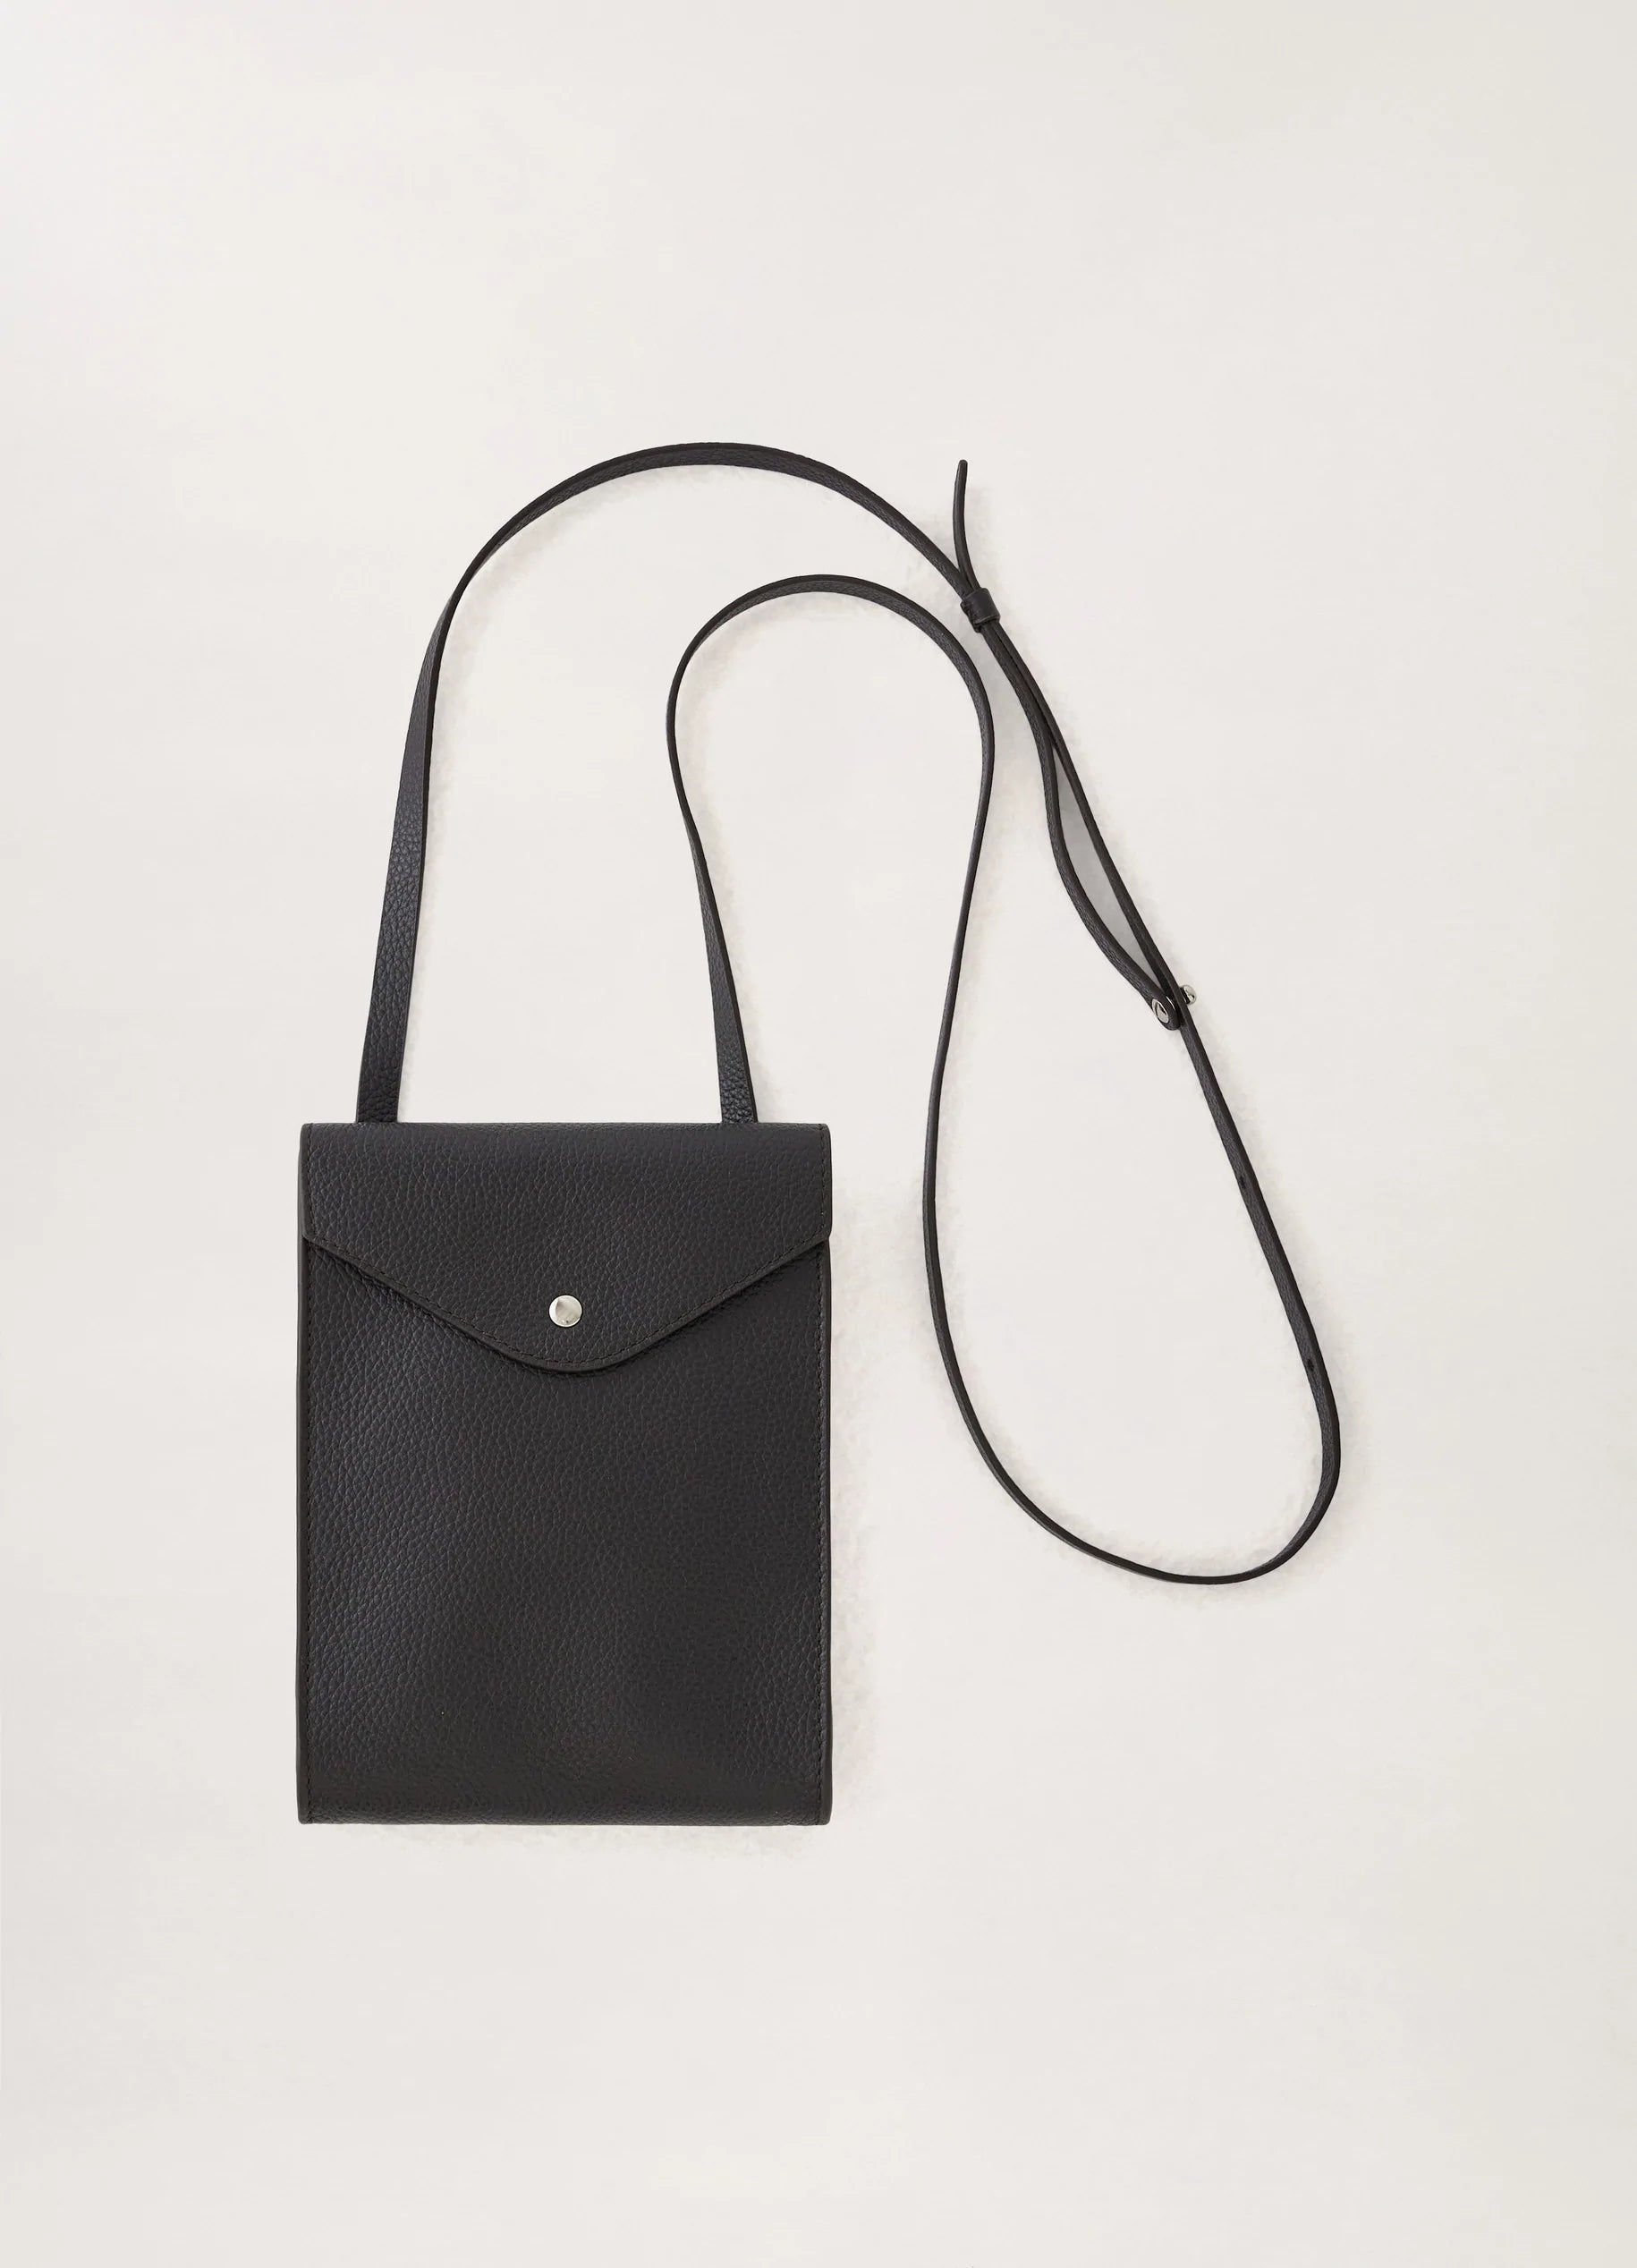 ENVELOPPE WITH STRAP
SOFT GRAINED LEATHER - 2